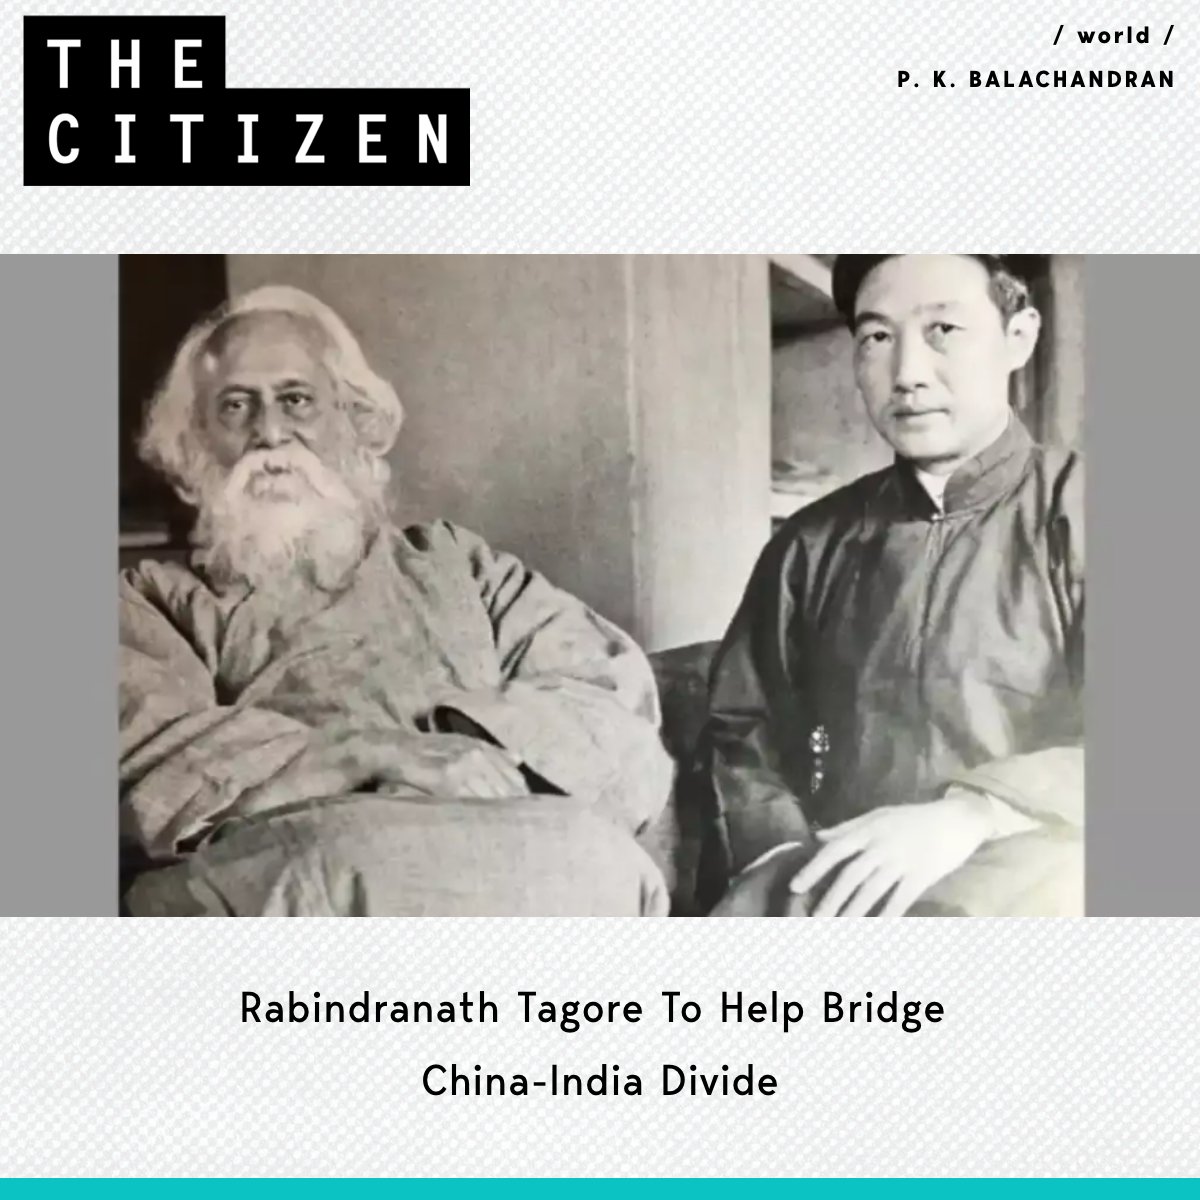 China to celebrate the centenary of Tagore’s 1924 visit in collaboration with Santiniketan. @pkbchandran writes: Read the full report here: shorturl.at/aekmR #rabindranathtagore